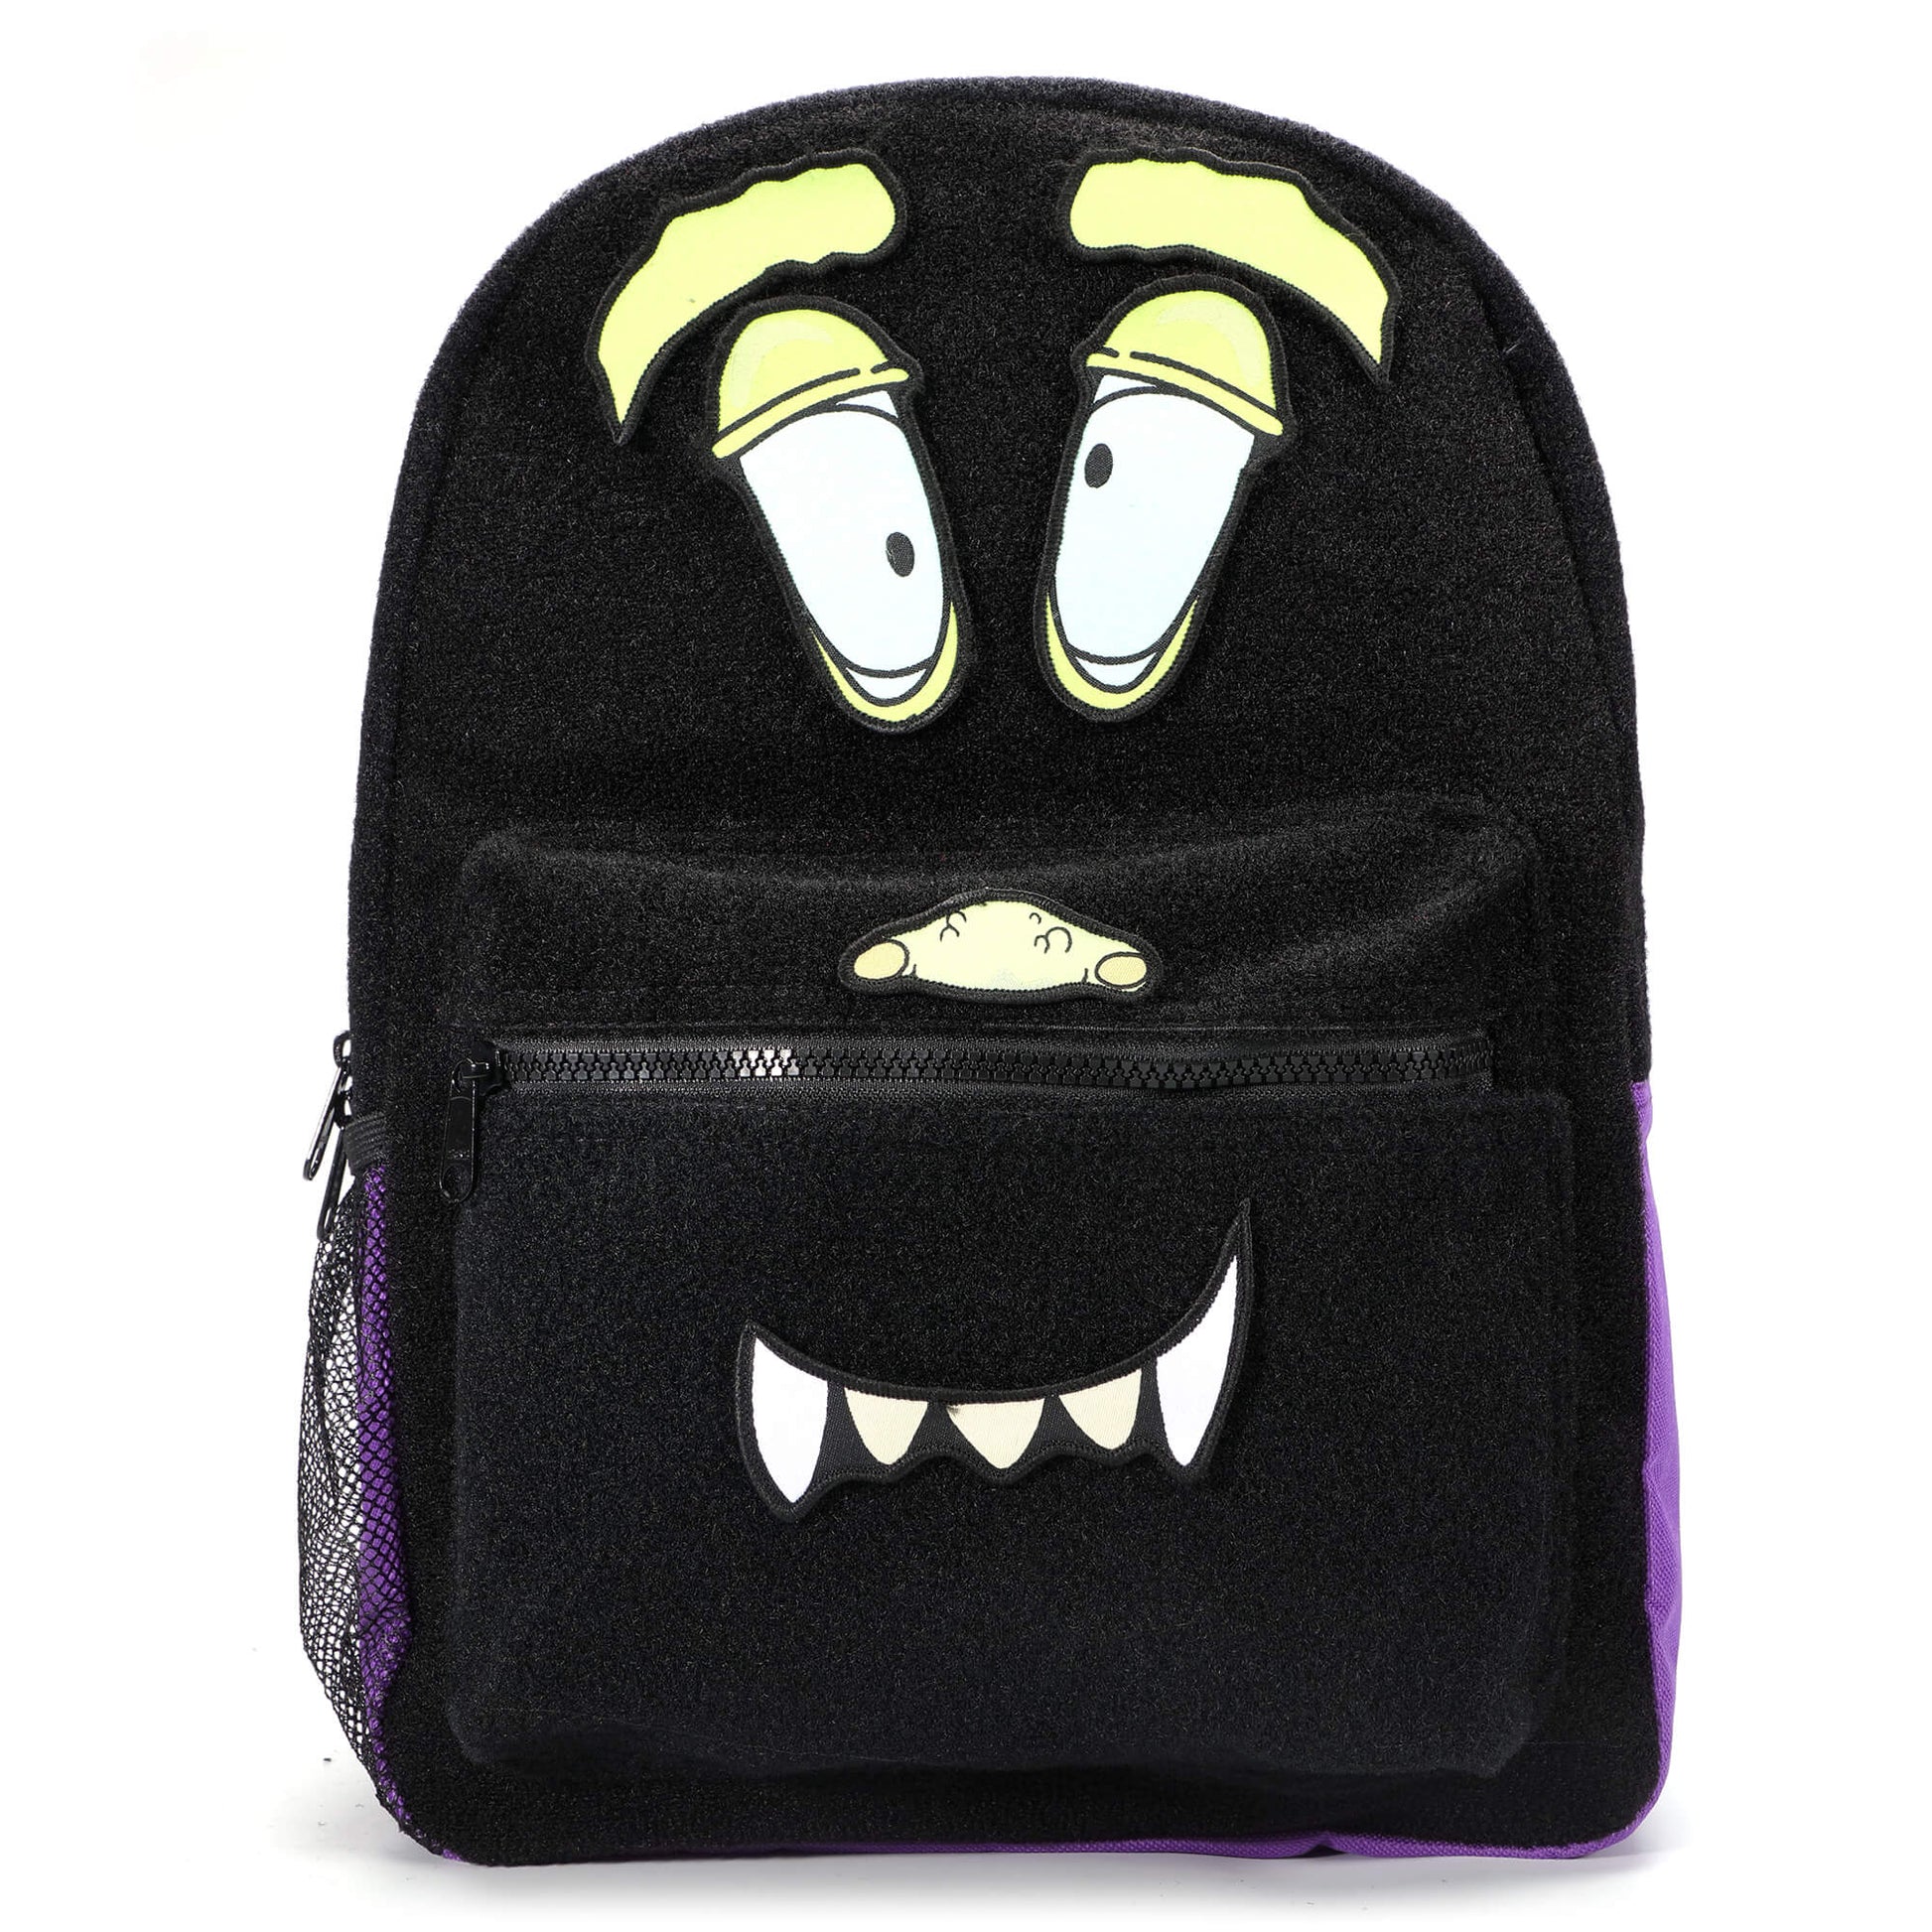 A backpack for kids with a fun and colorful monster character design, featuring multiple pockets and a padded back for all-day comfort.